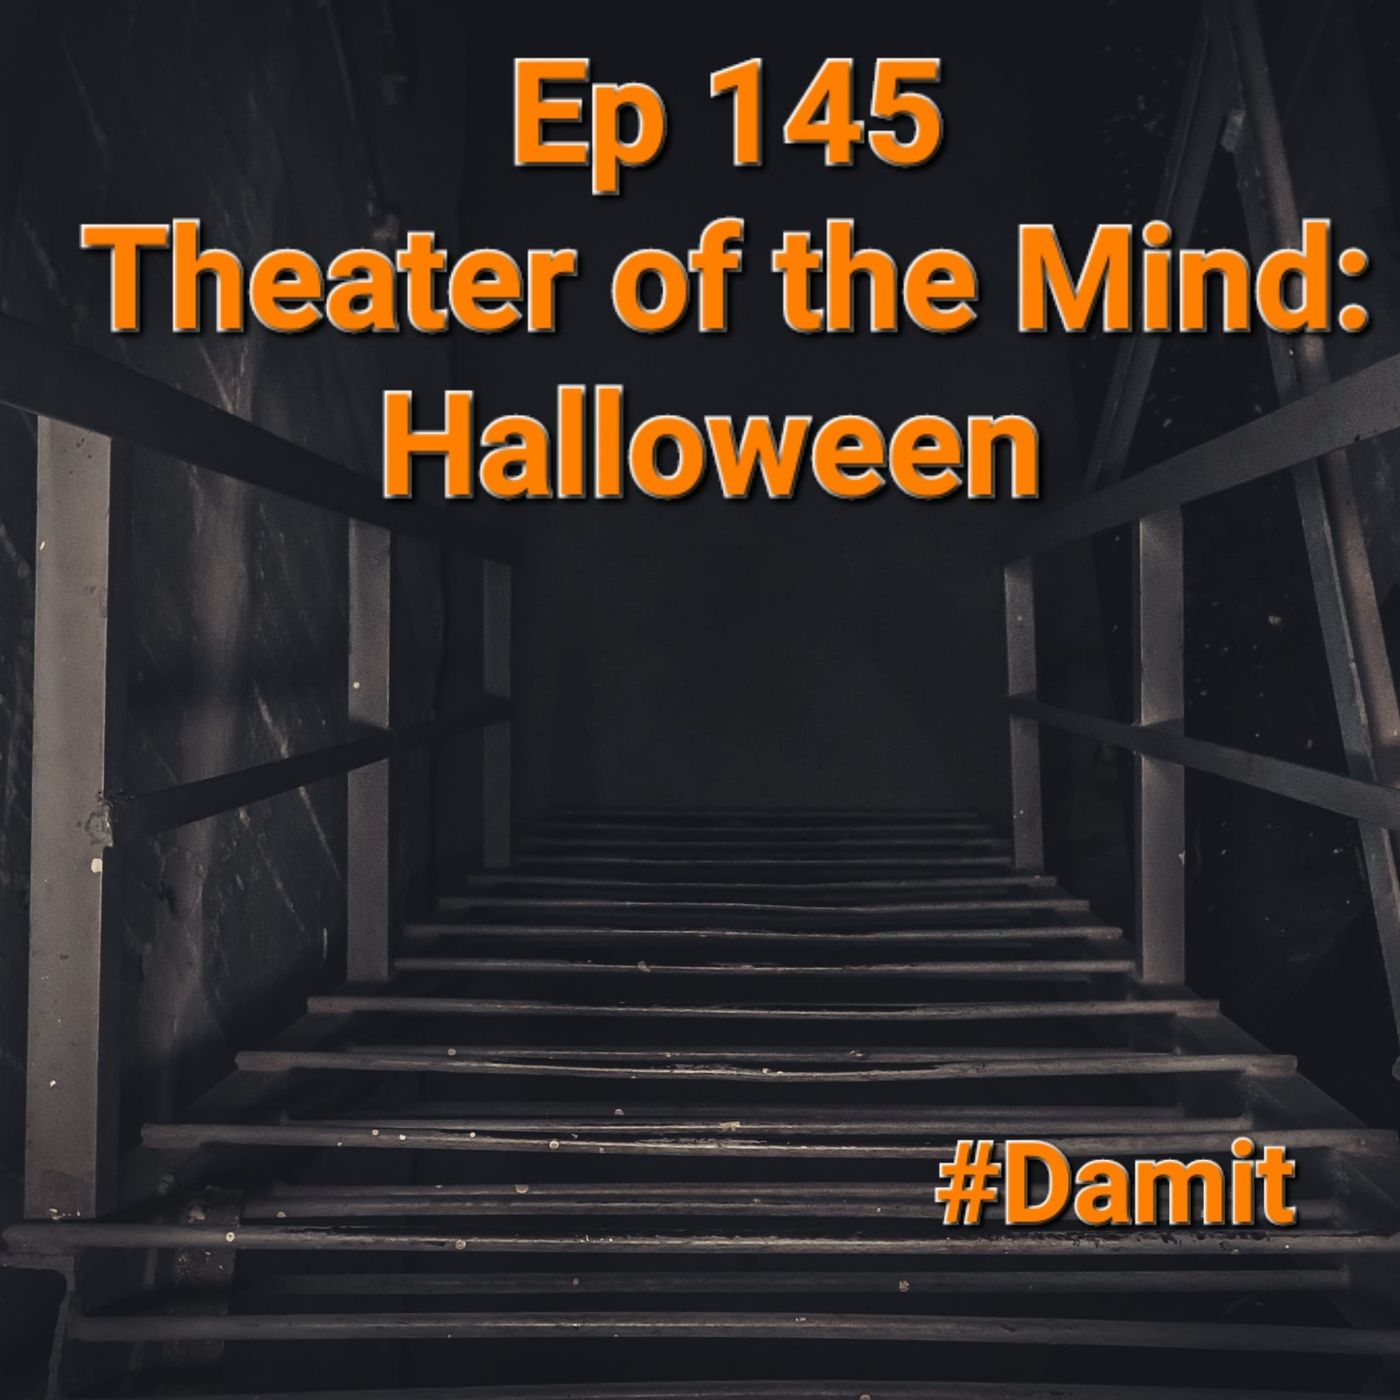 Ep 145 Theater of the Mind: Halloween